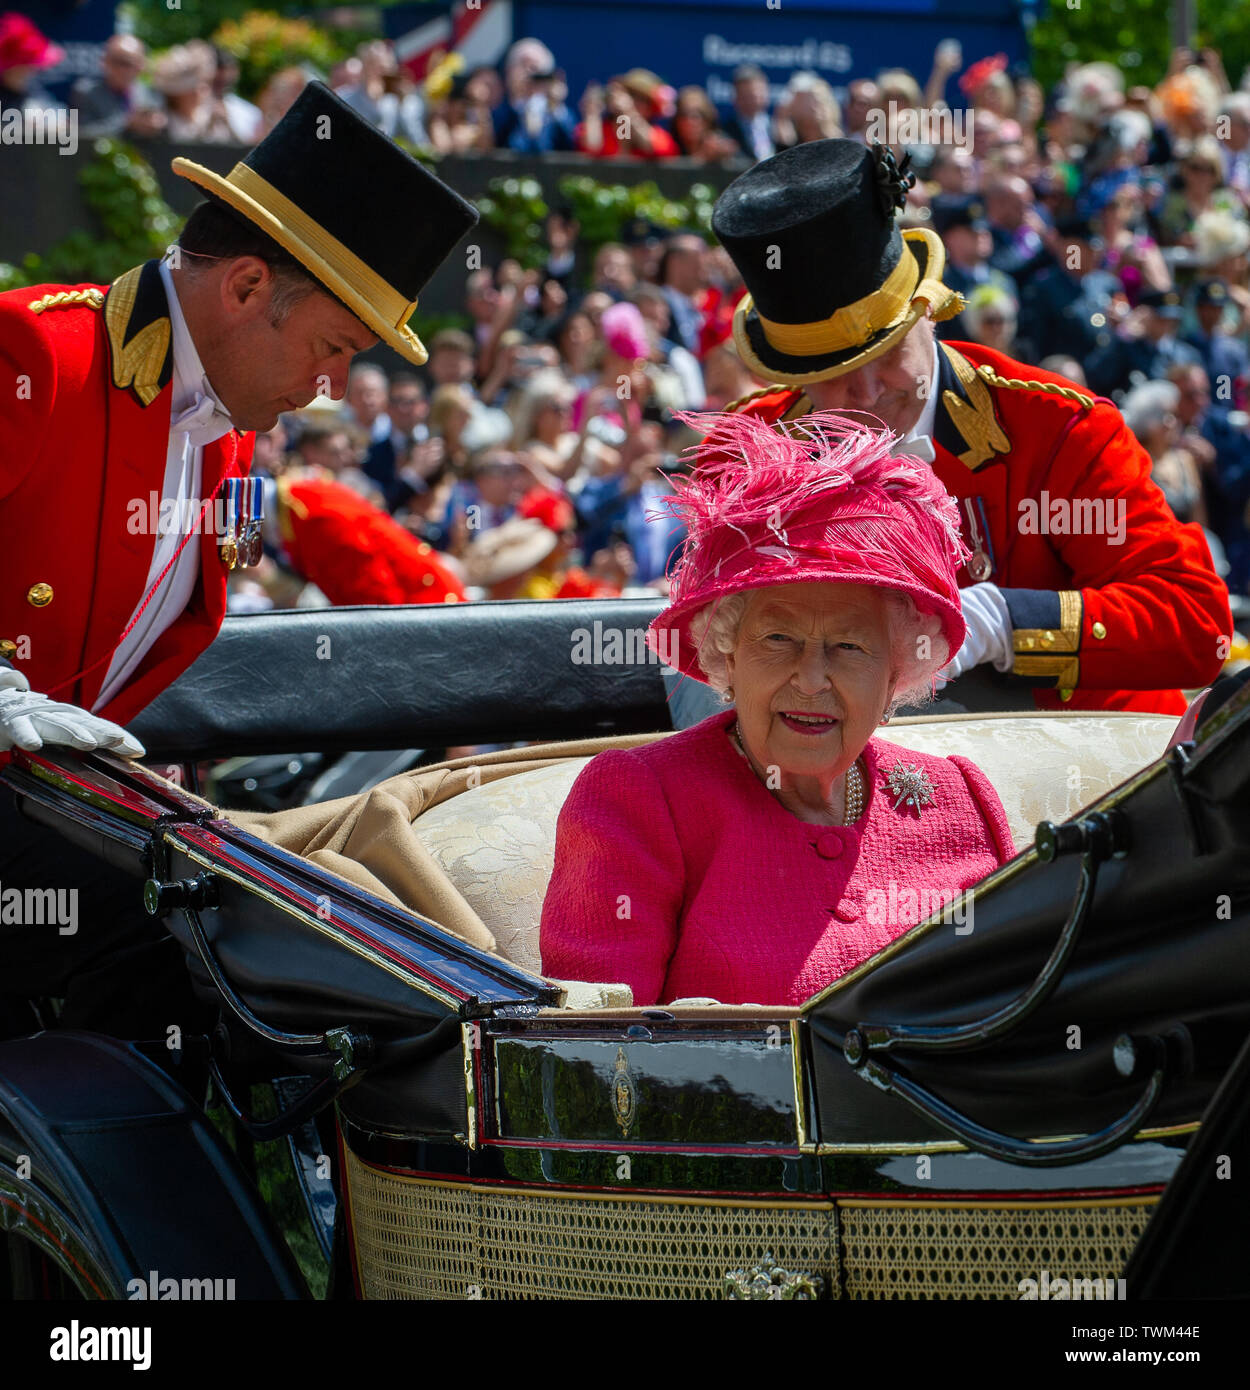 Ascot, Berkshire, UK. 21st June, 2019. Her Majesty the Queen looks radiant in cerise pink as she arrives in the Royal Procession on day four at Royal Ascot, Ascot Racecourse. Credit: Maureen McLean/Alamy Live News Stock Photo